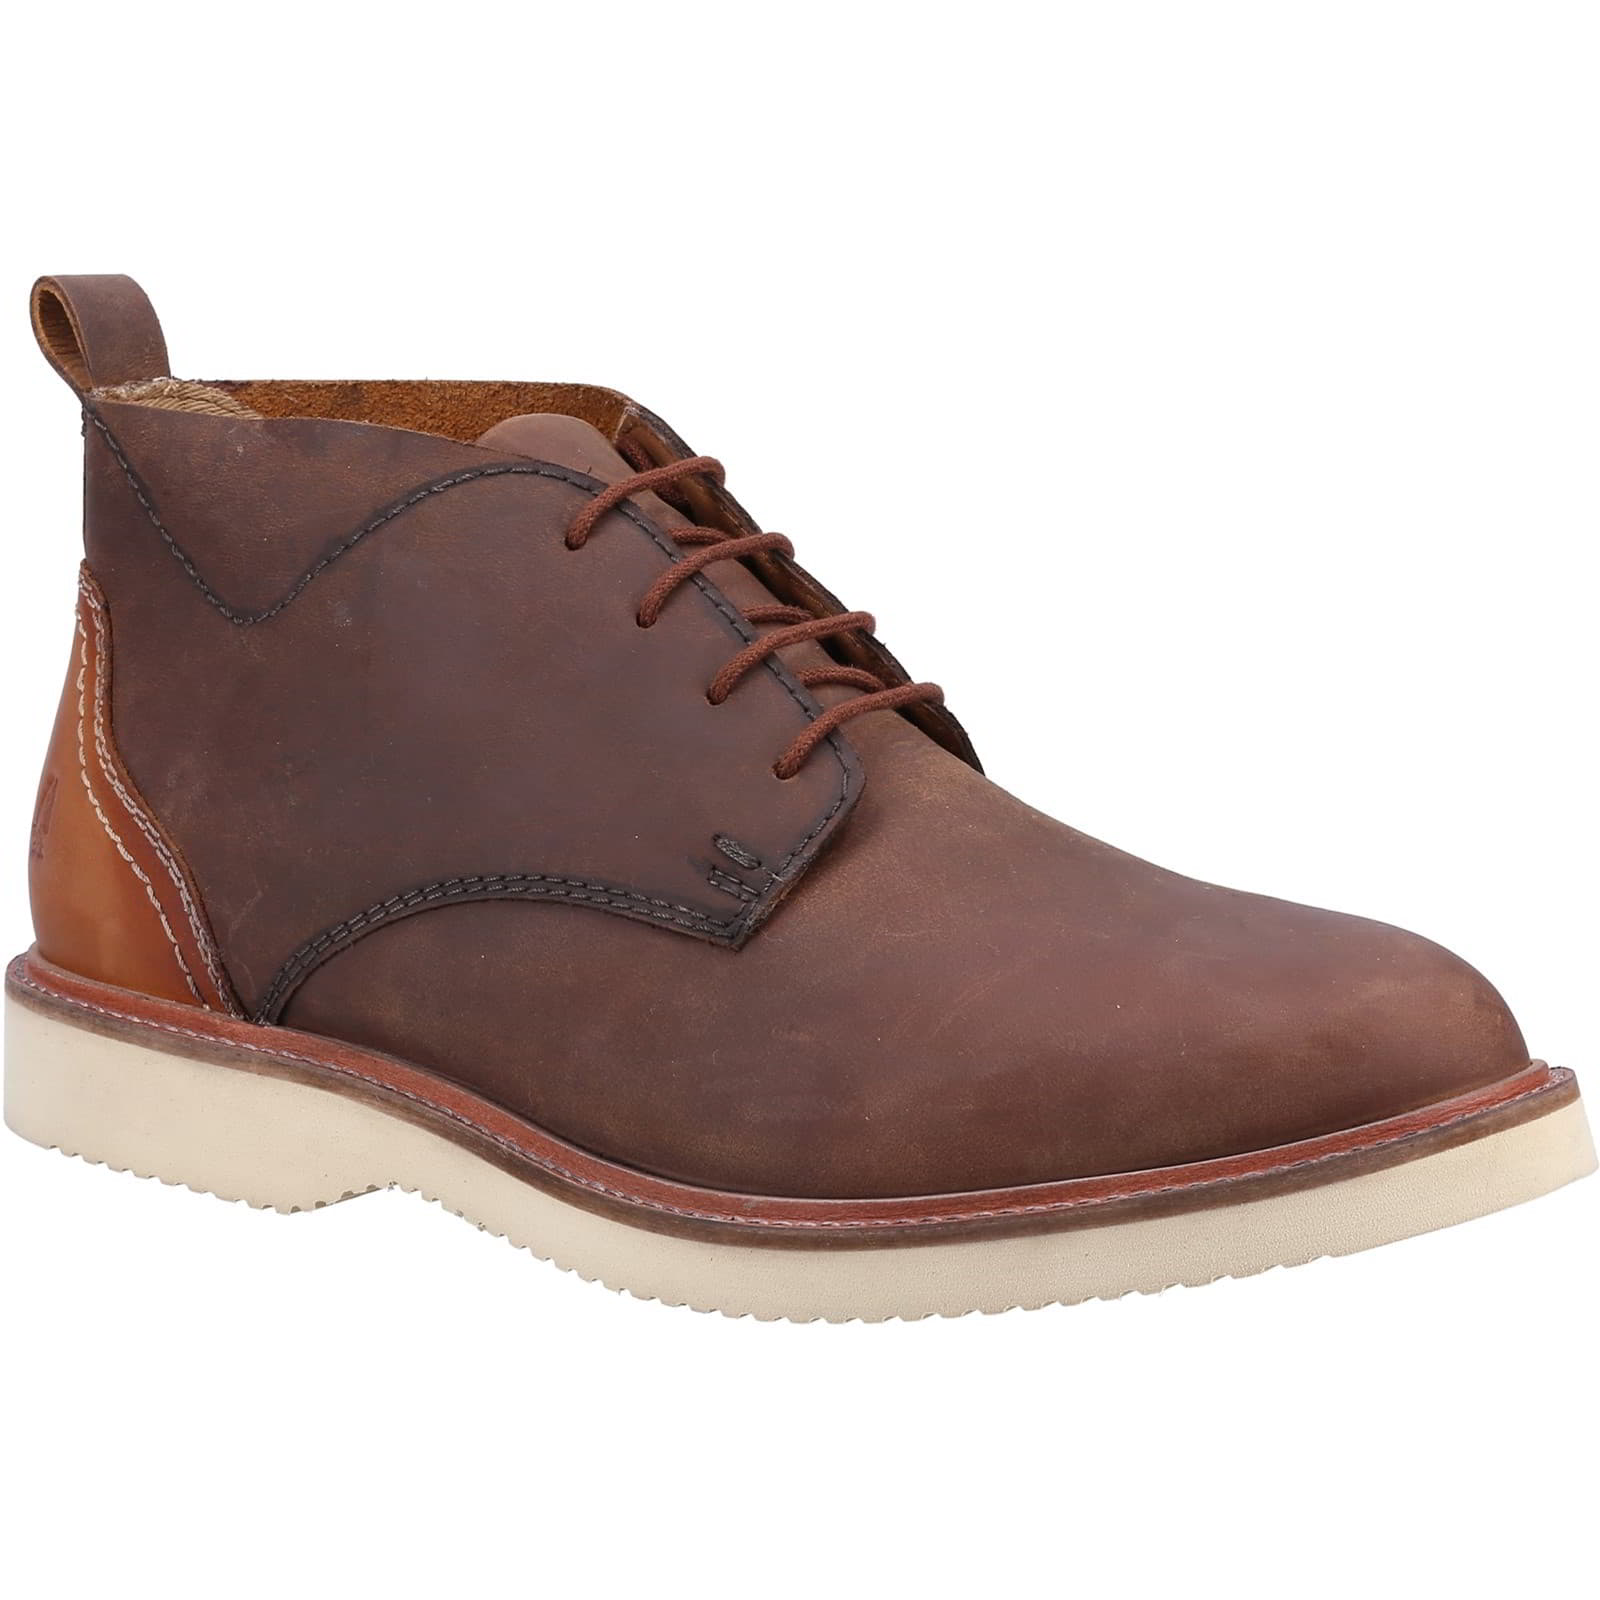 Hush Puppies Men's Wesley Lace UP Desert Chukka Ankle Boots - UK 7